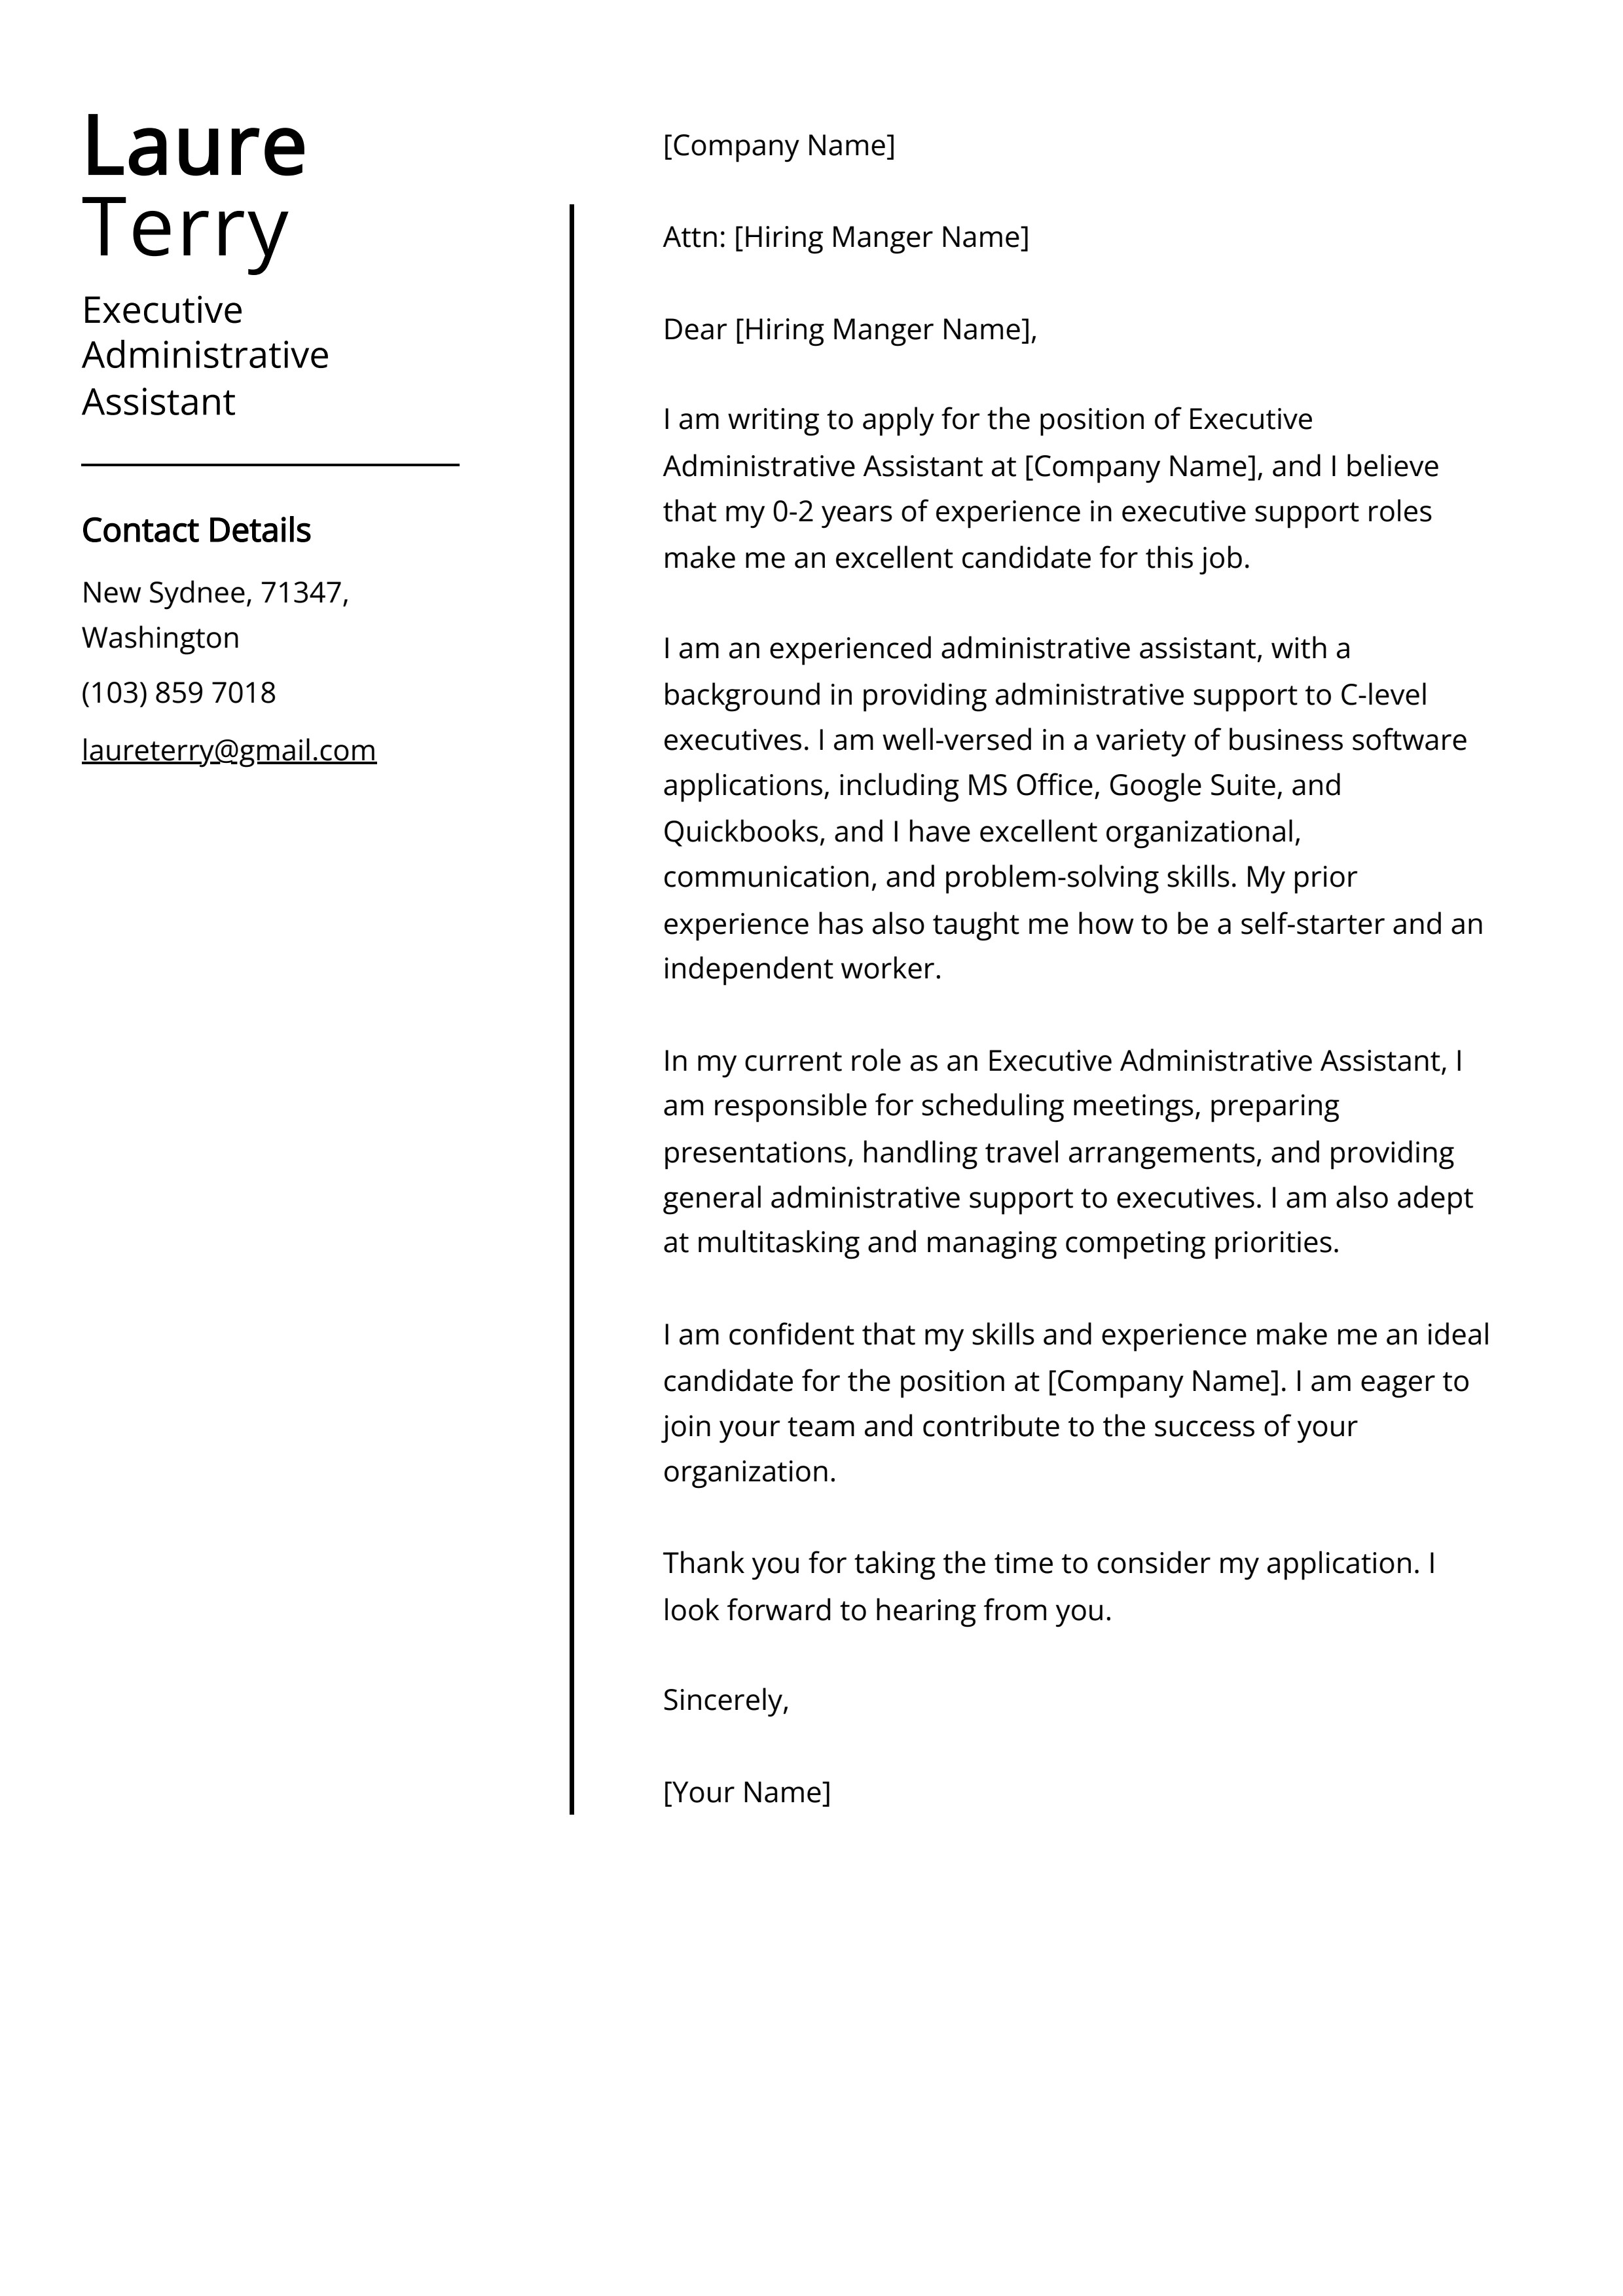 Executive Administrative Assistant Cover Letter Example